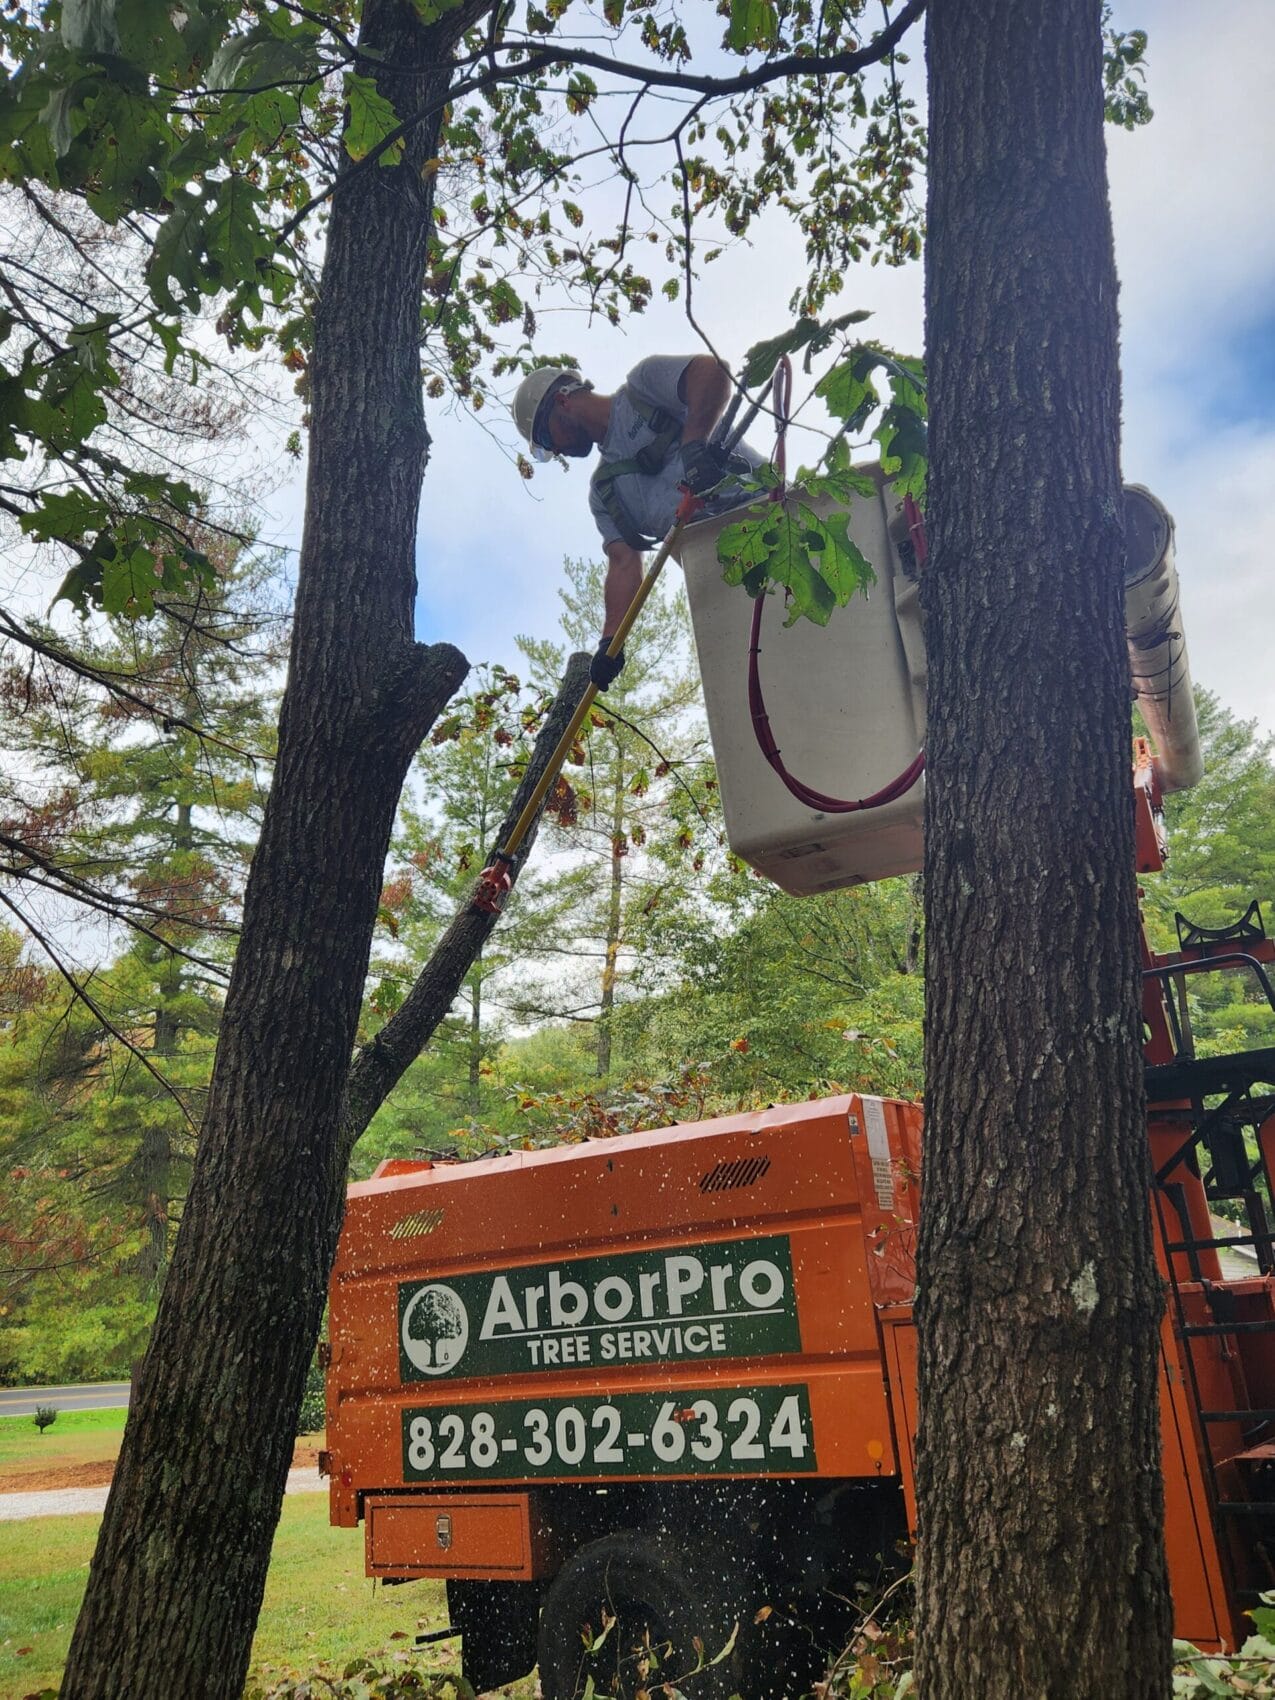 Man trimming limb of tree while in bucket